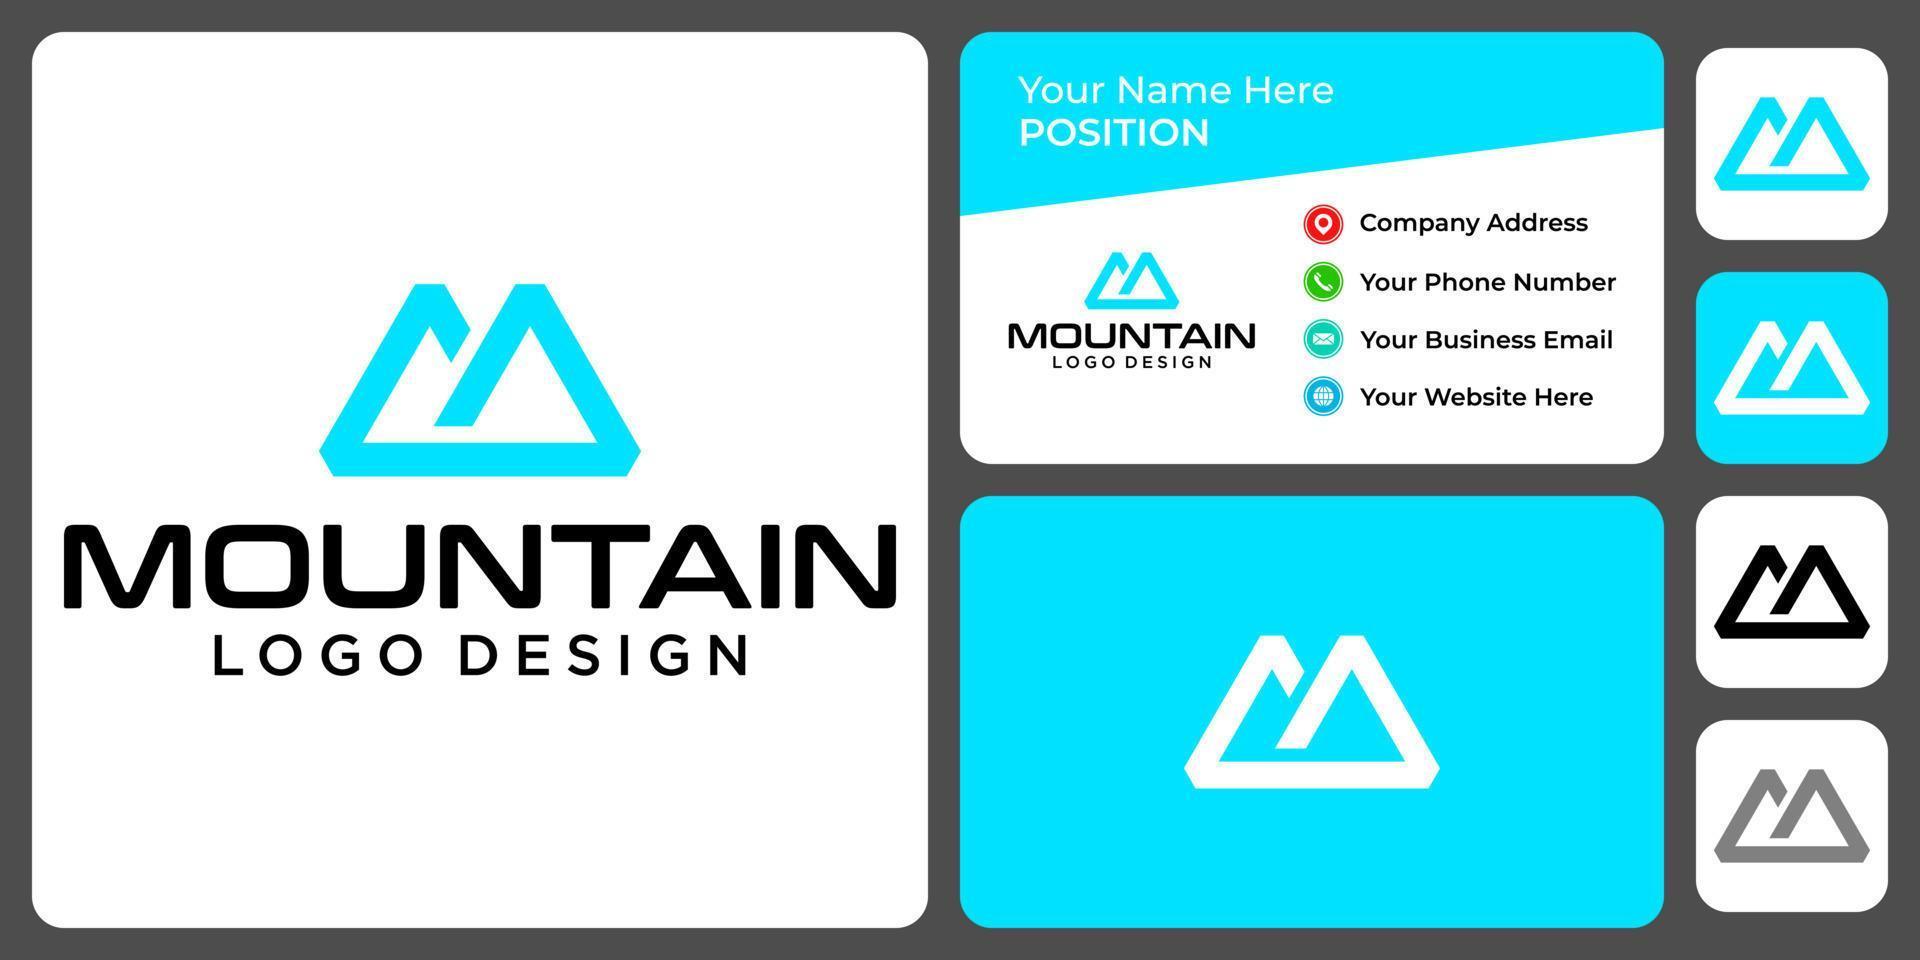 Letter M monogram mountain logo design with business card template. vector